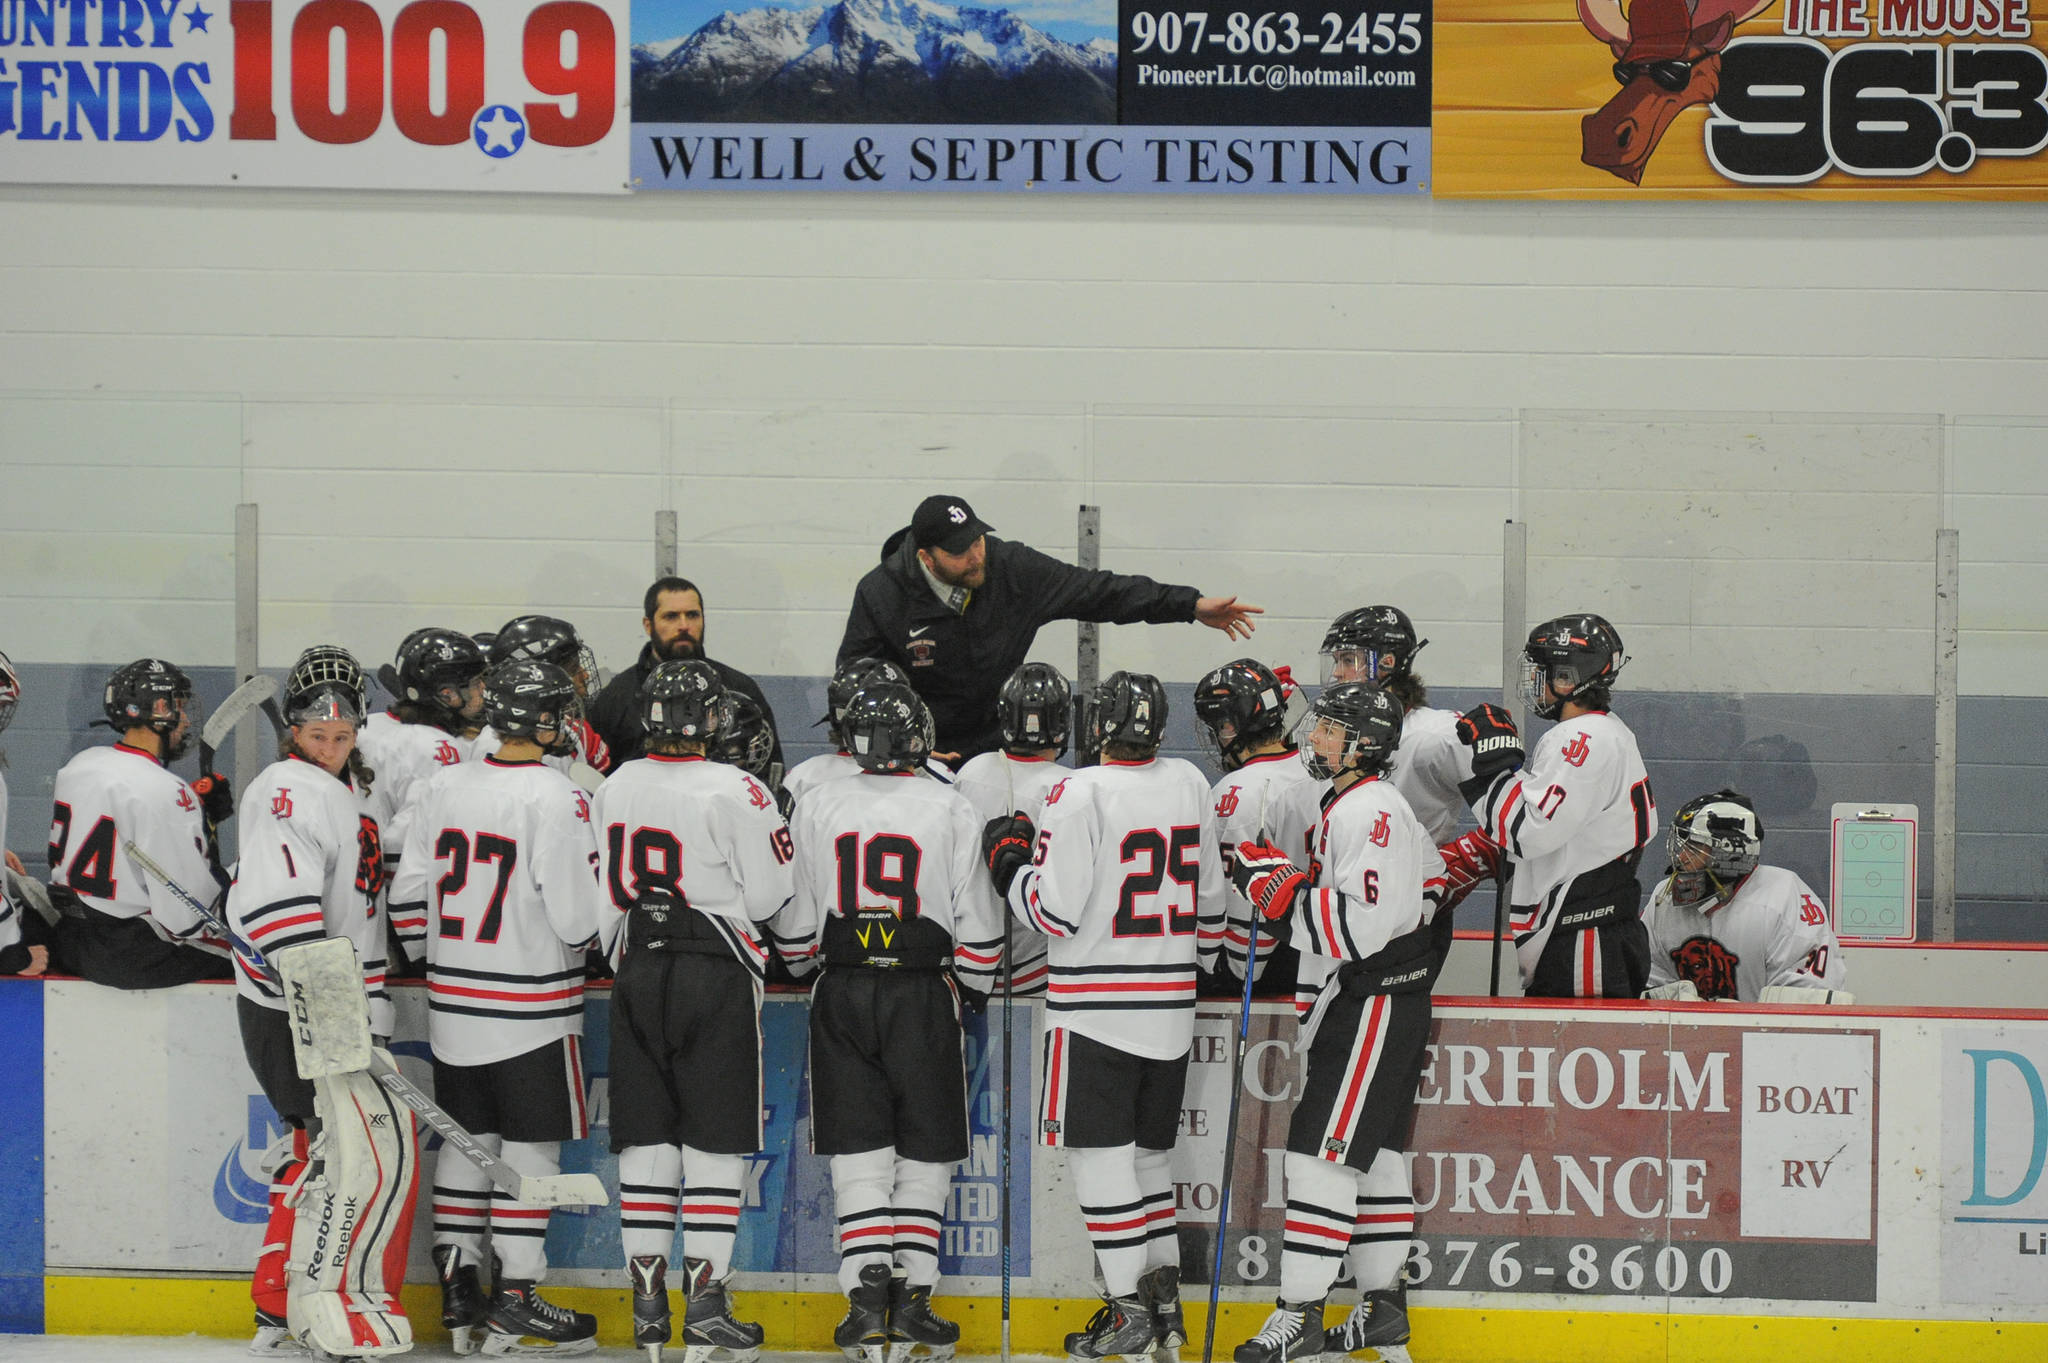 Coach Matt Boline tries to motivate his squad in the third period. (Michael Dinneen | For the Juneau Empire)